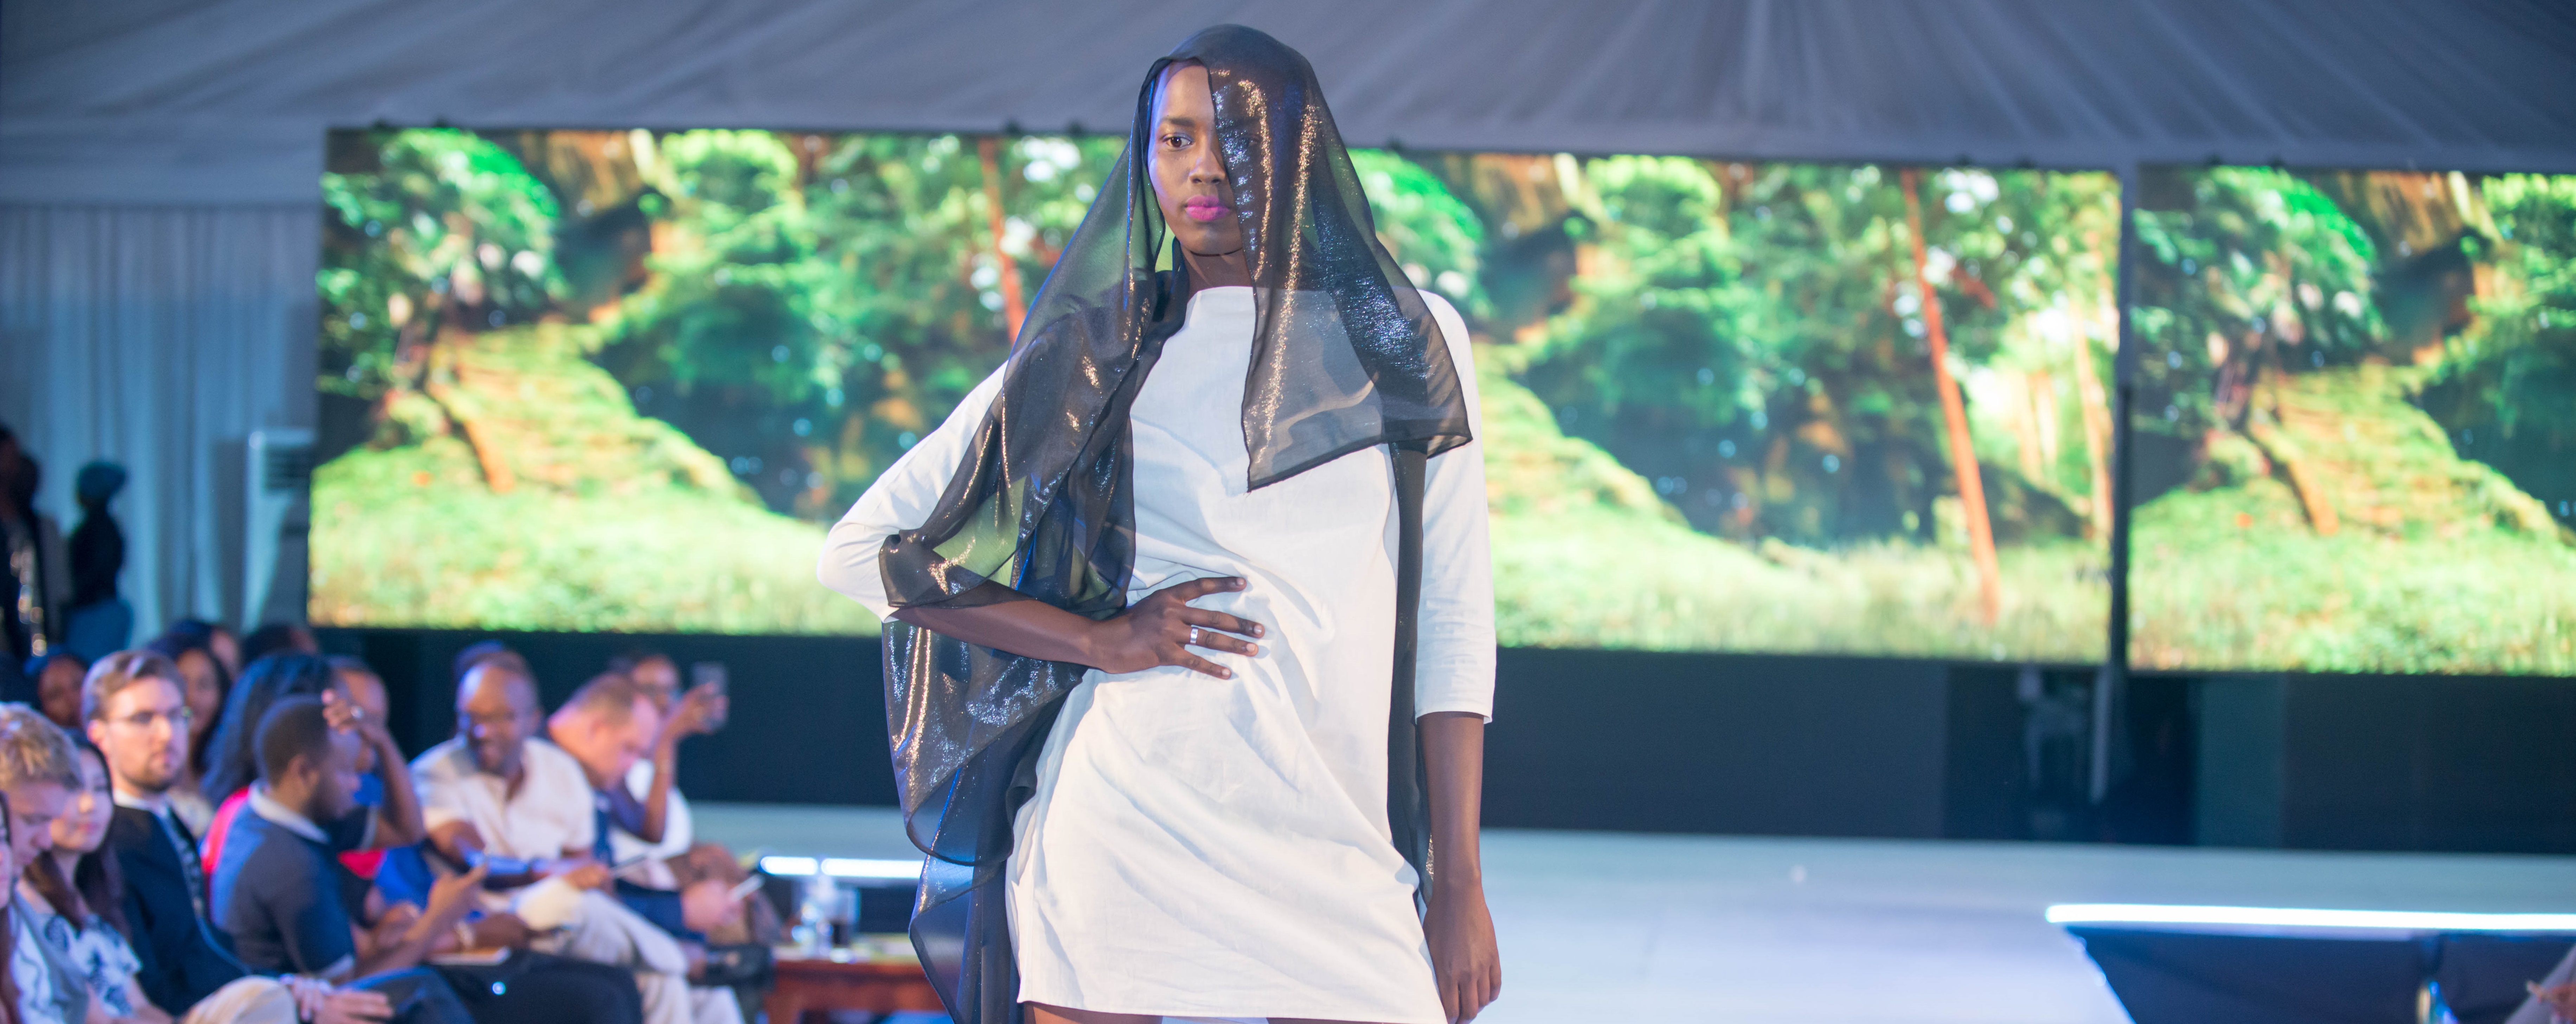 From dream to reality: Burundian refugees take to the catwalk for Kigali Fashion Week 2017